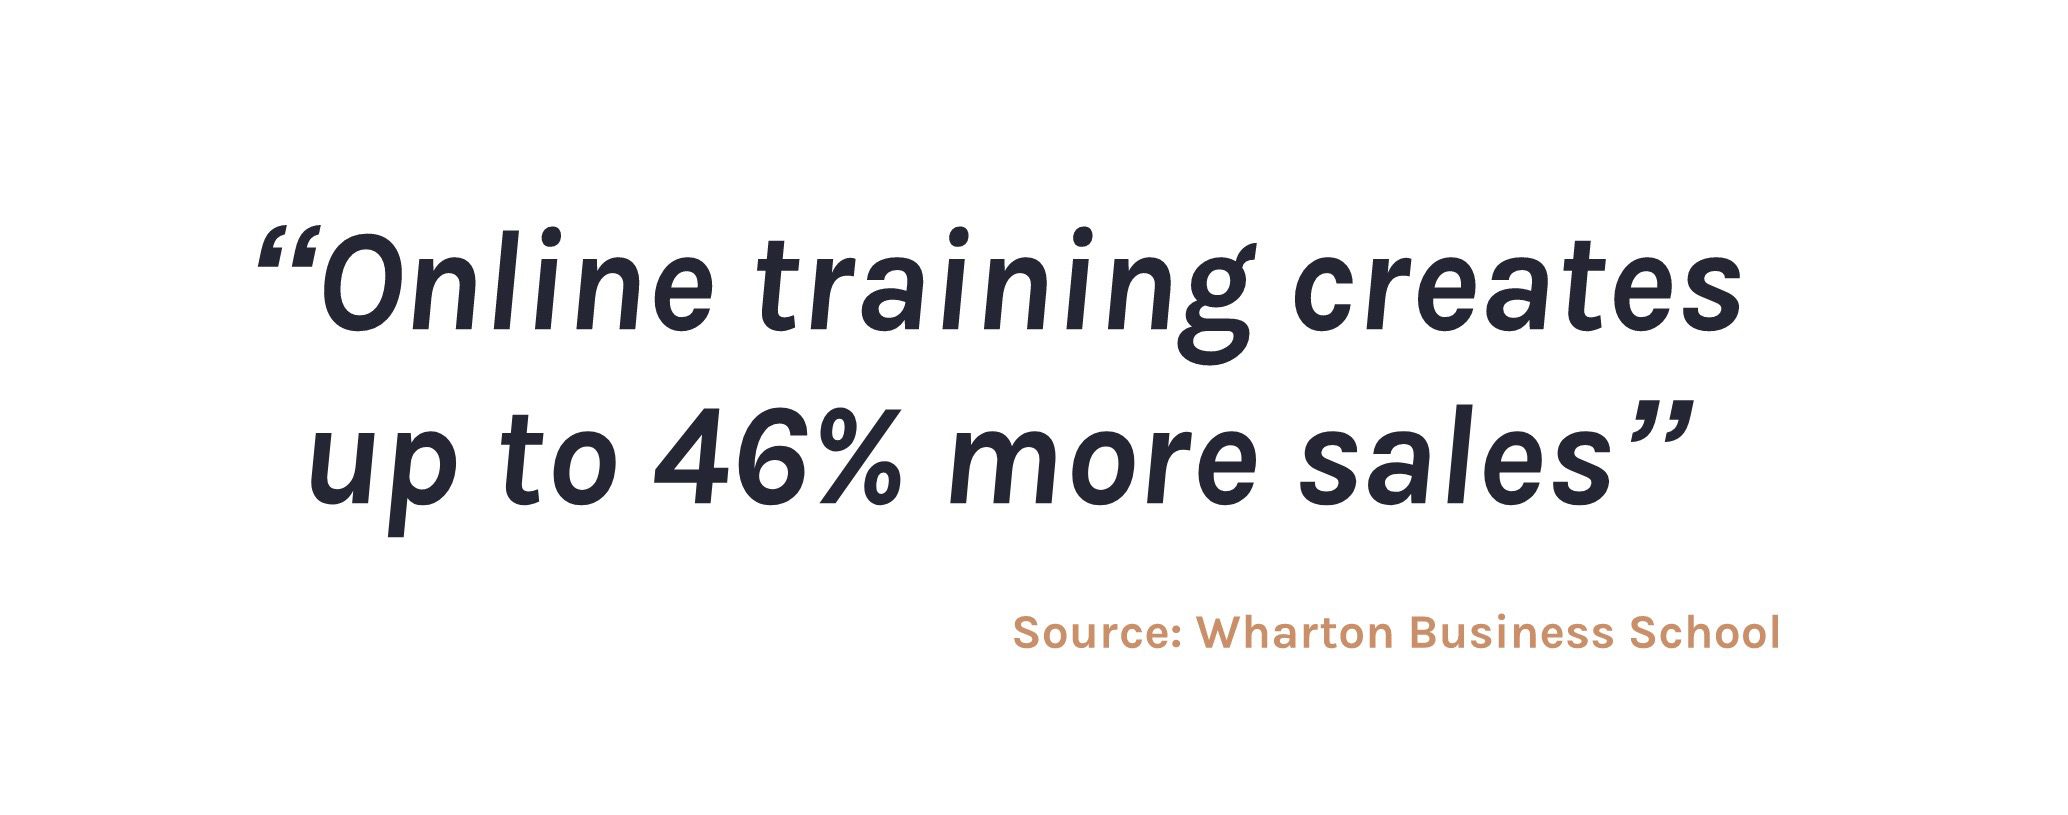 Online training creates up to 46% more sales